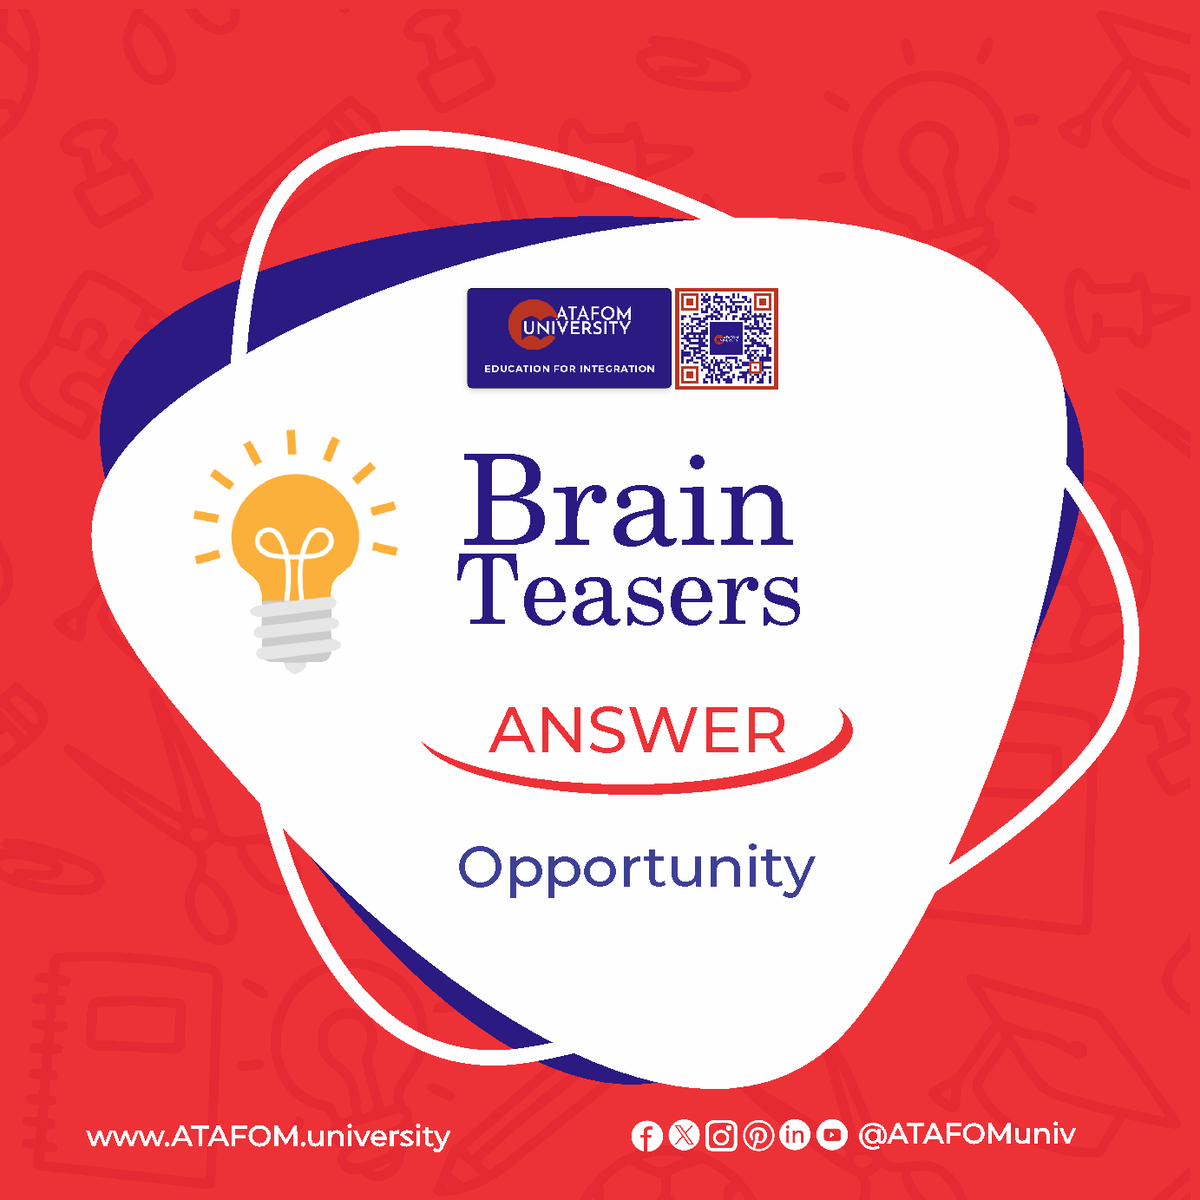 Exercise your mind with our latest brain teaser challenge!
Can you solve it? 
Test your wits and sharpen your cognitive skills with ATAFOM University. 

#BrainTeaser #MindChallenge #PuzzleFun #CriticalThinking #BrainGames #UniversityLife #ATAFOMonlinecampus #Learning #Education